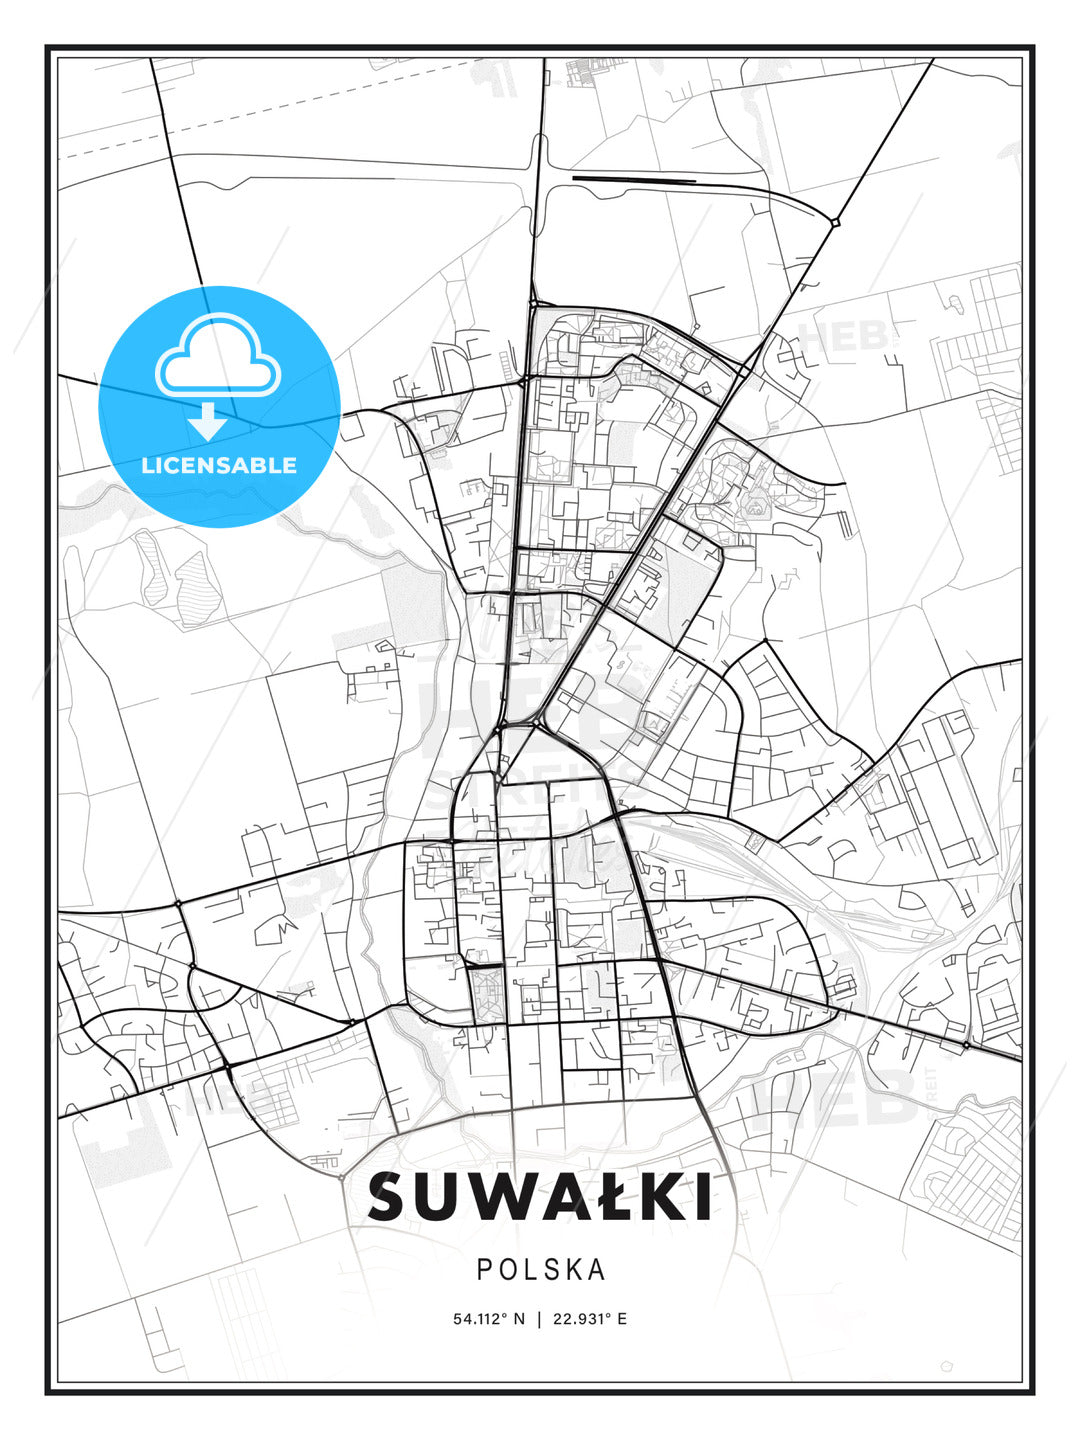 Suwałki, Poland, Modern Print Template in Various Formats - HEBSTREITS Sketches